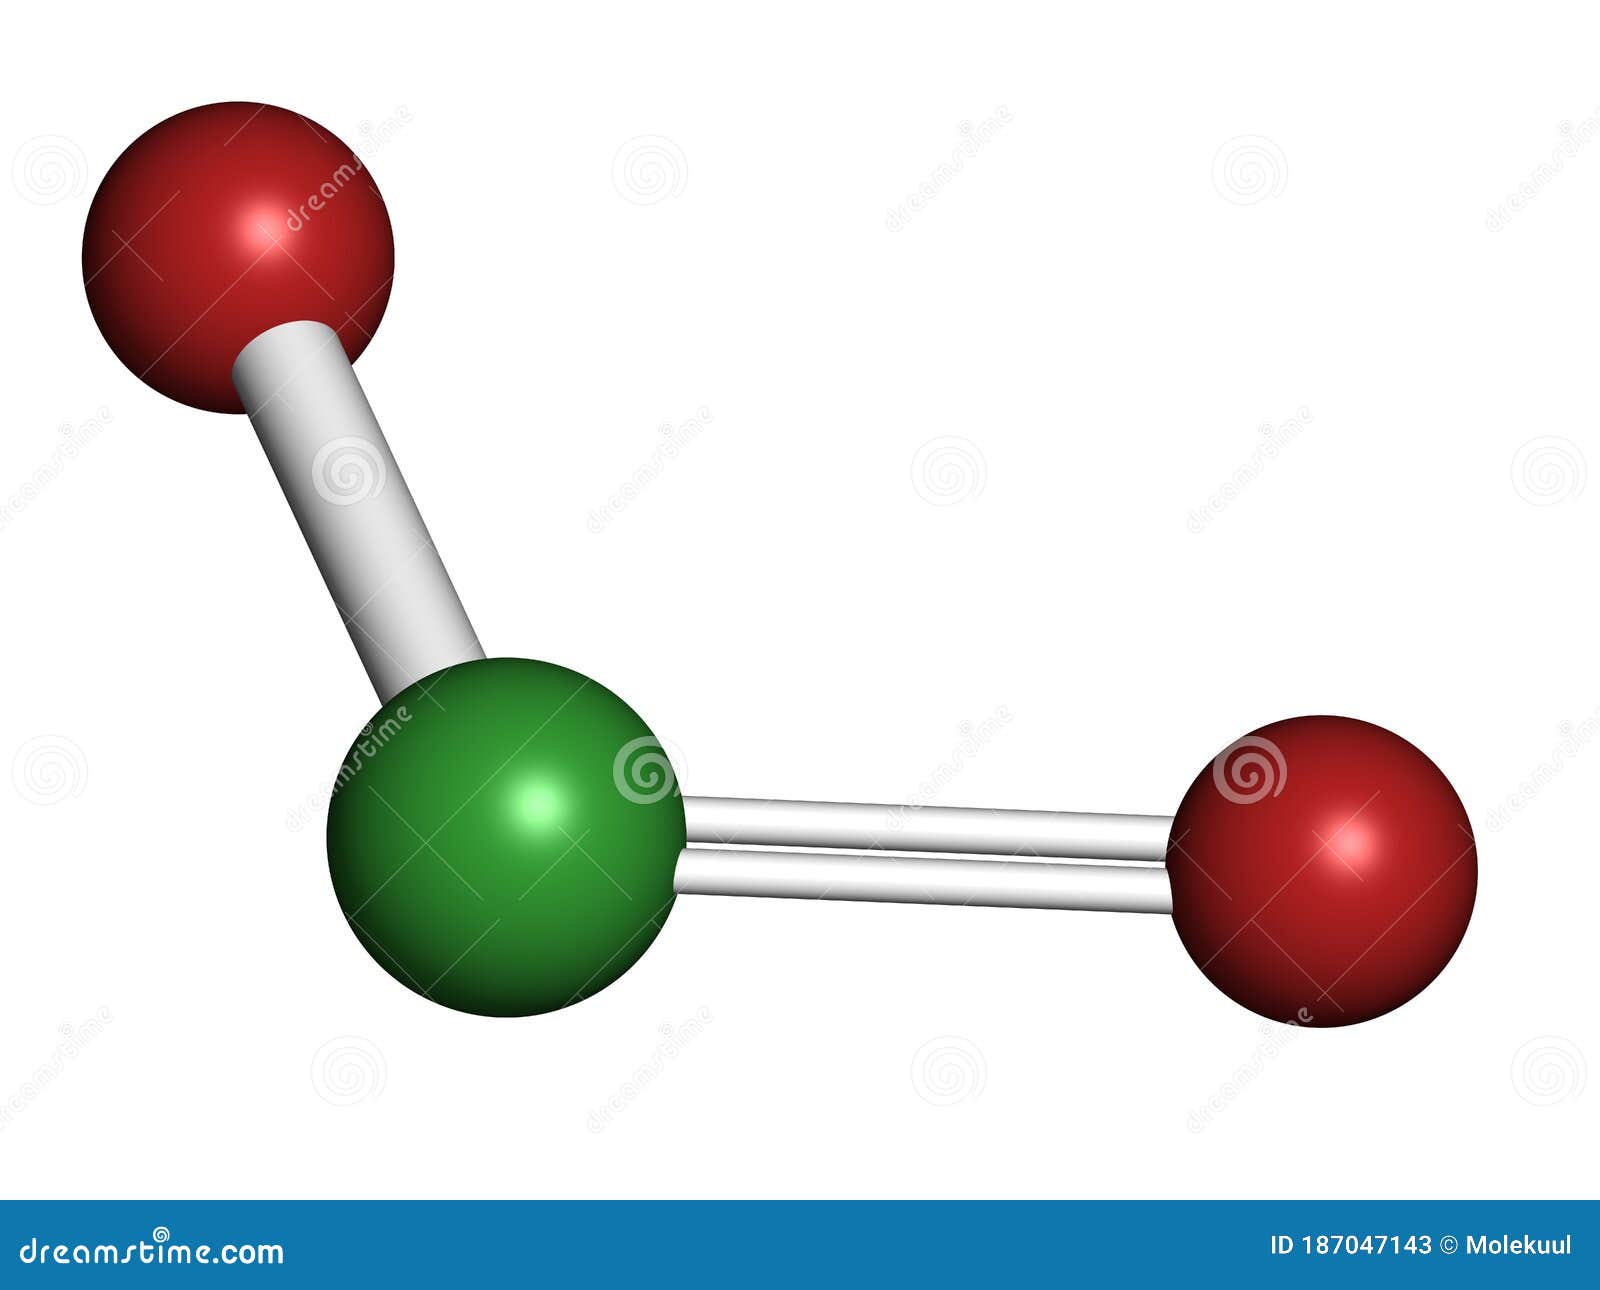 chlorine dioxide (clo2) molecule. used in pulp bleaching and for disinfection of drinking water